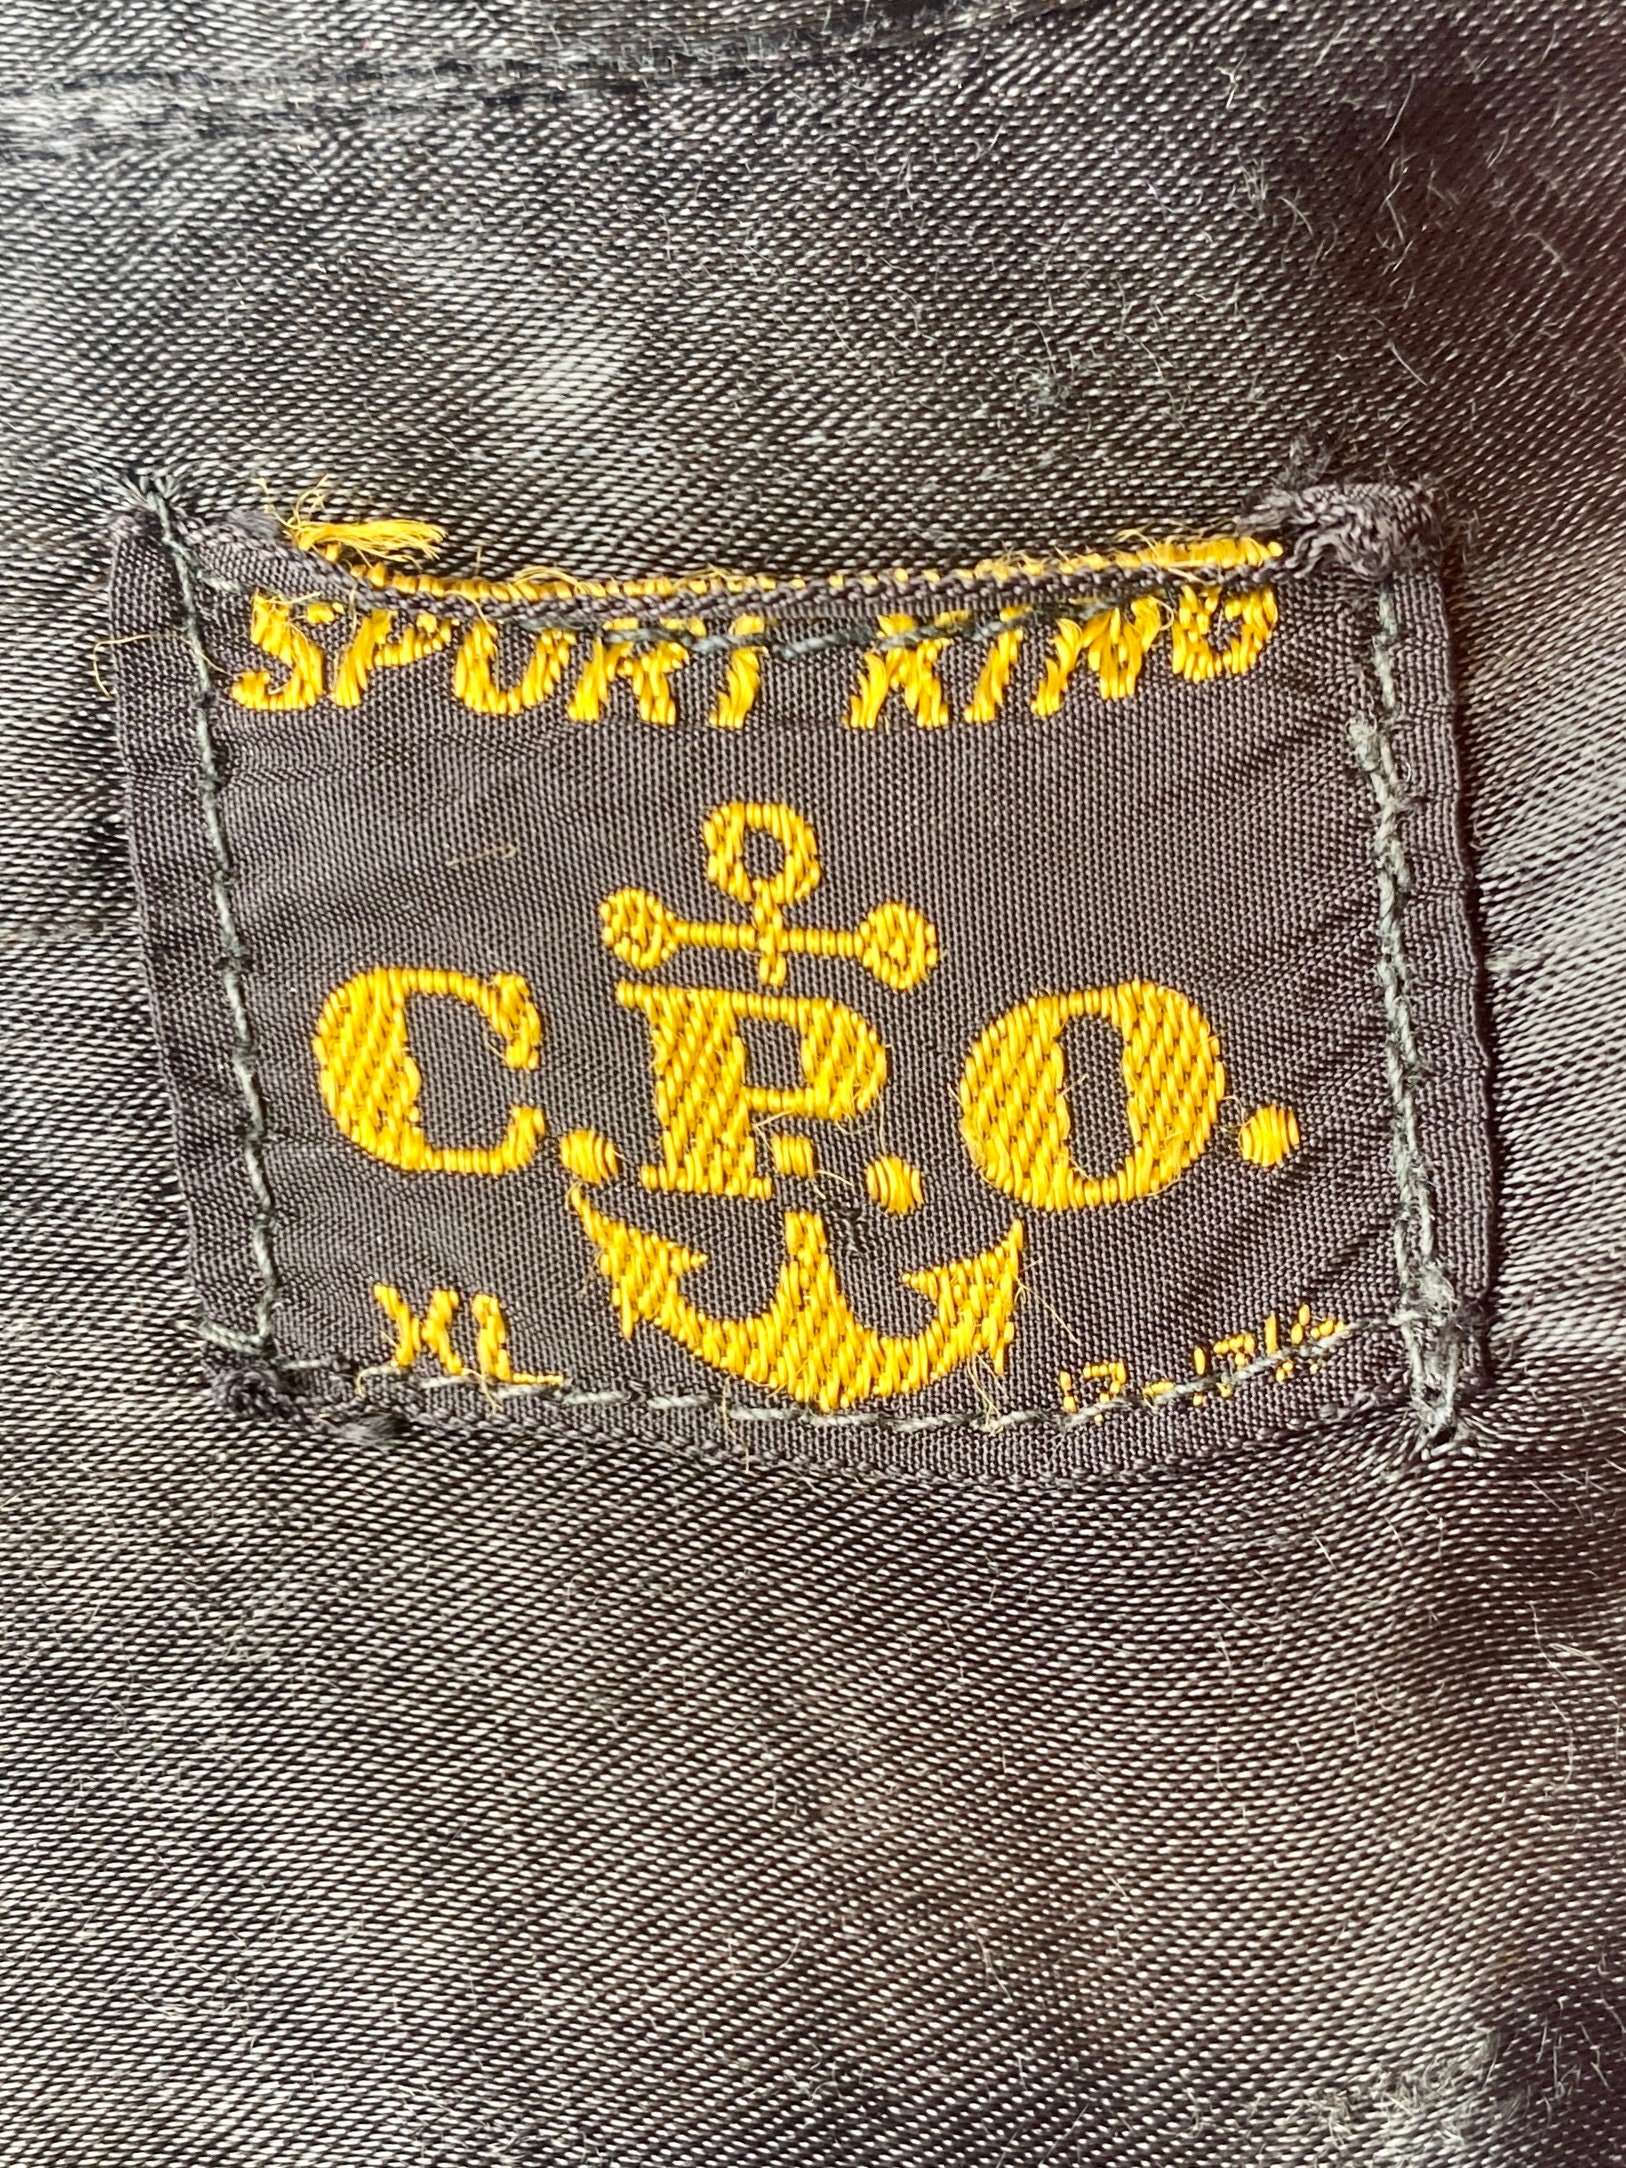 1950s 1960s Sport King CPO Shirt Size X-large - Etsy